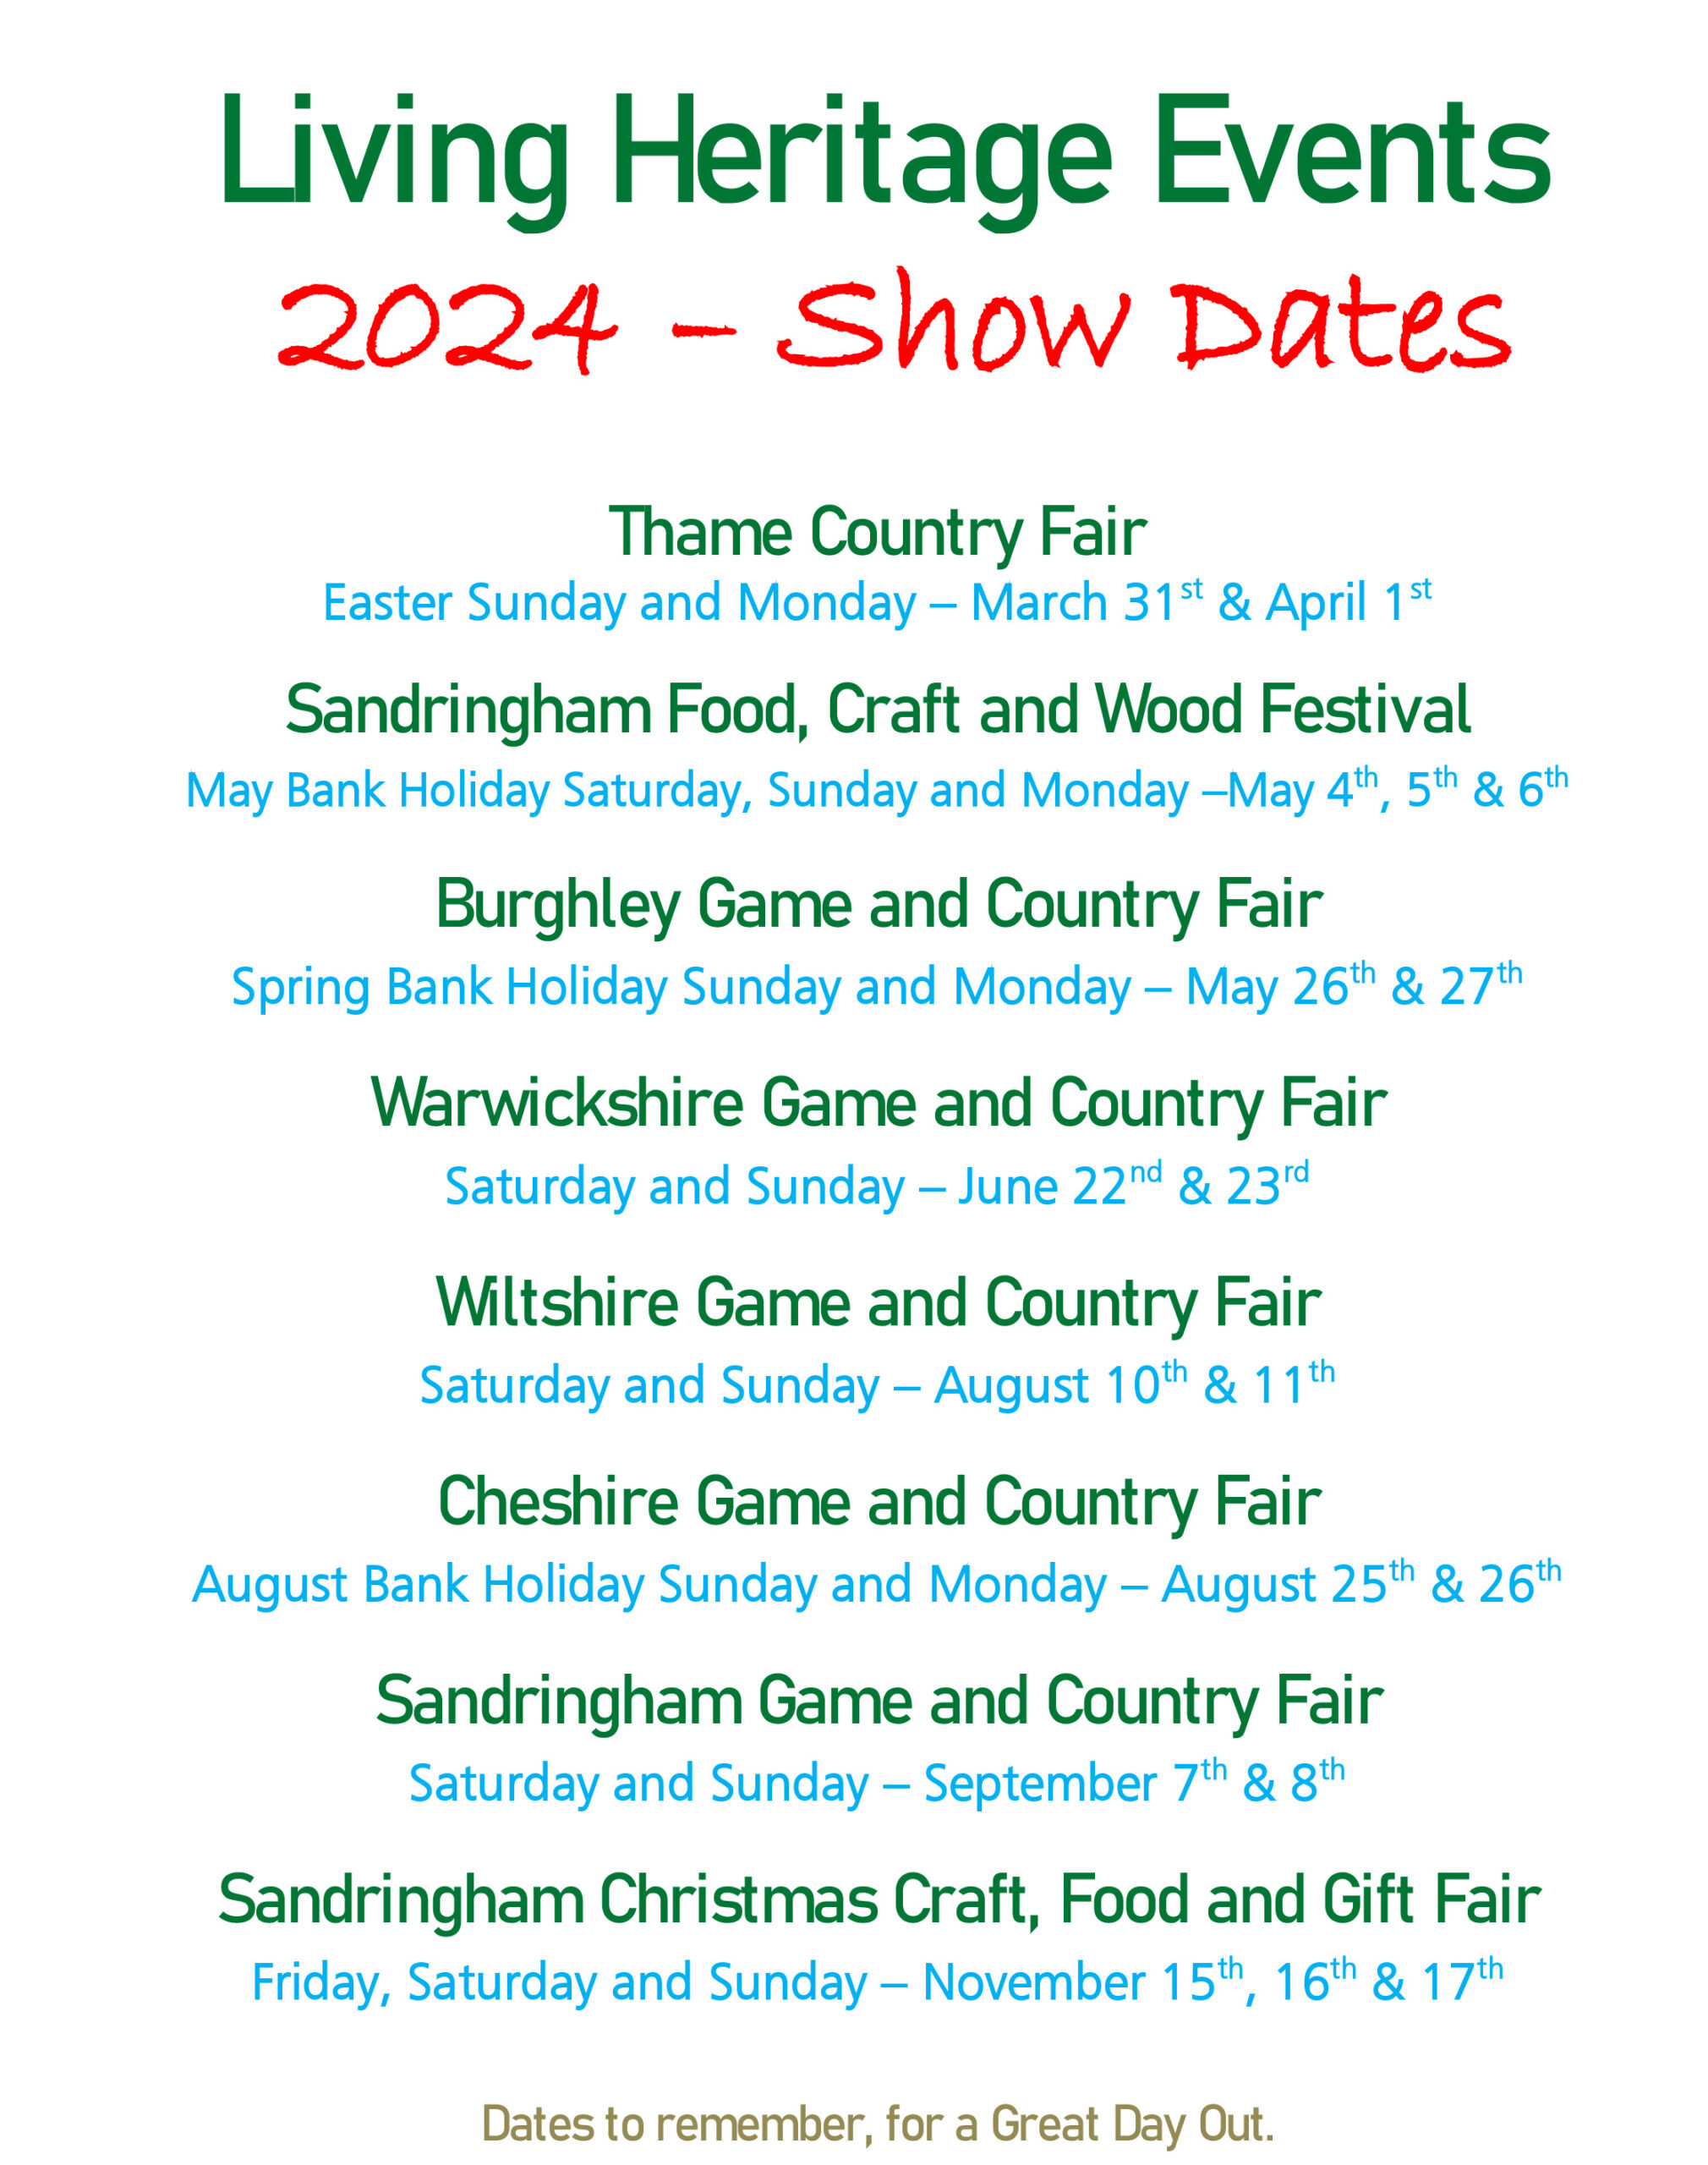 Living Heritage Show Dates 2024